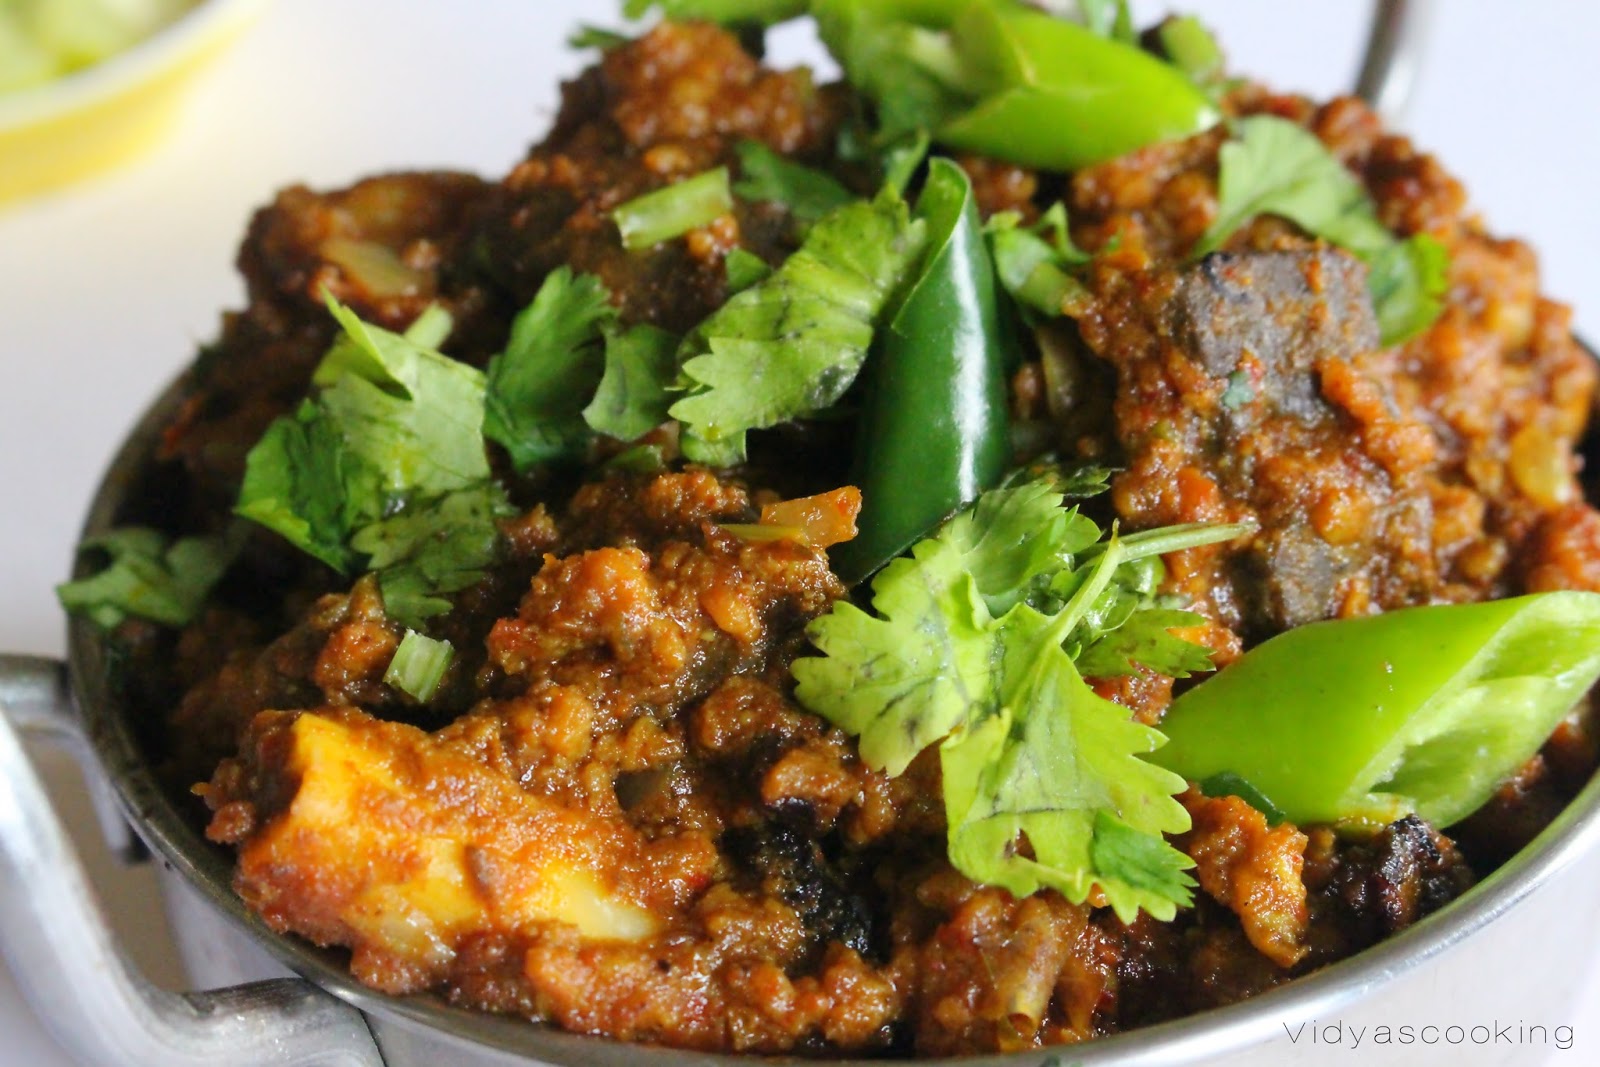 Keema Kaleji Recipe (Mutton Mince and Liver in Spicy Curry)